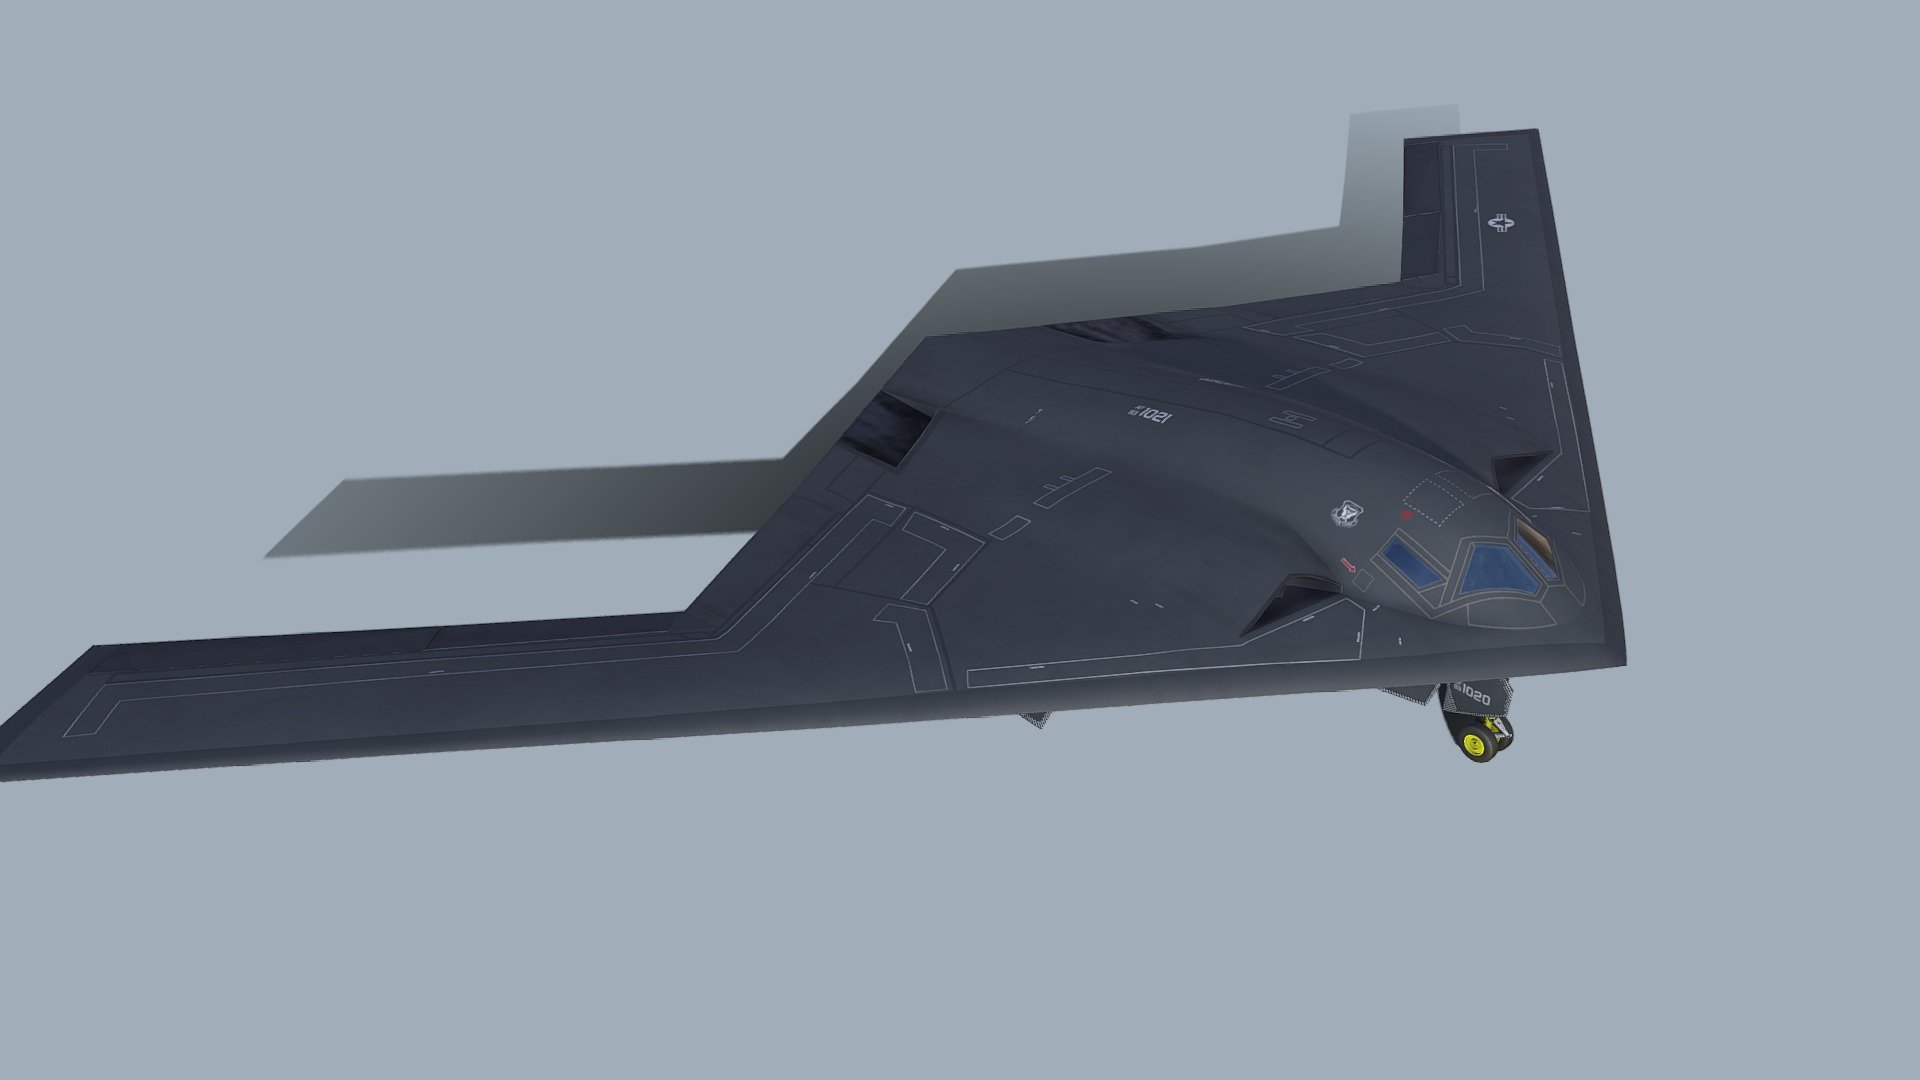 The Northrop Grumman B-21 Raider is an American strategic bomber under development for the United States Air Force (USAF) by Northrop Grumman. As part of the Long Range Strike Bomber (LRS-B) program, it is to be a long-range, stealth intercontinental strategic bomber for the USAF, able to deliver conventional and thermonuclear weapons.
As of 2022, the B-21 is expected to enter service by 2026 or 2027 3d model